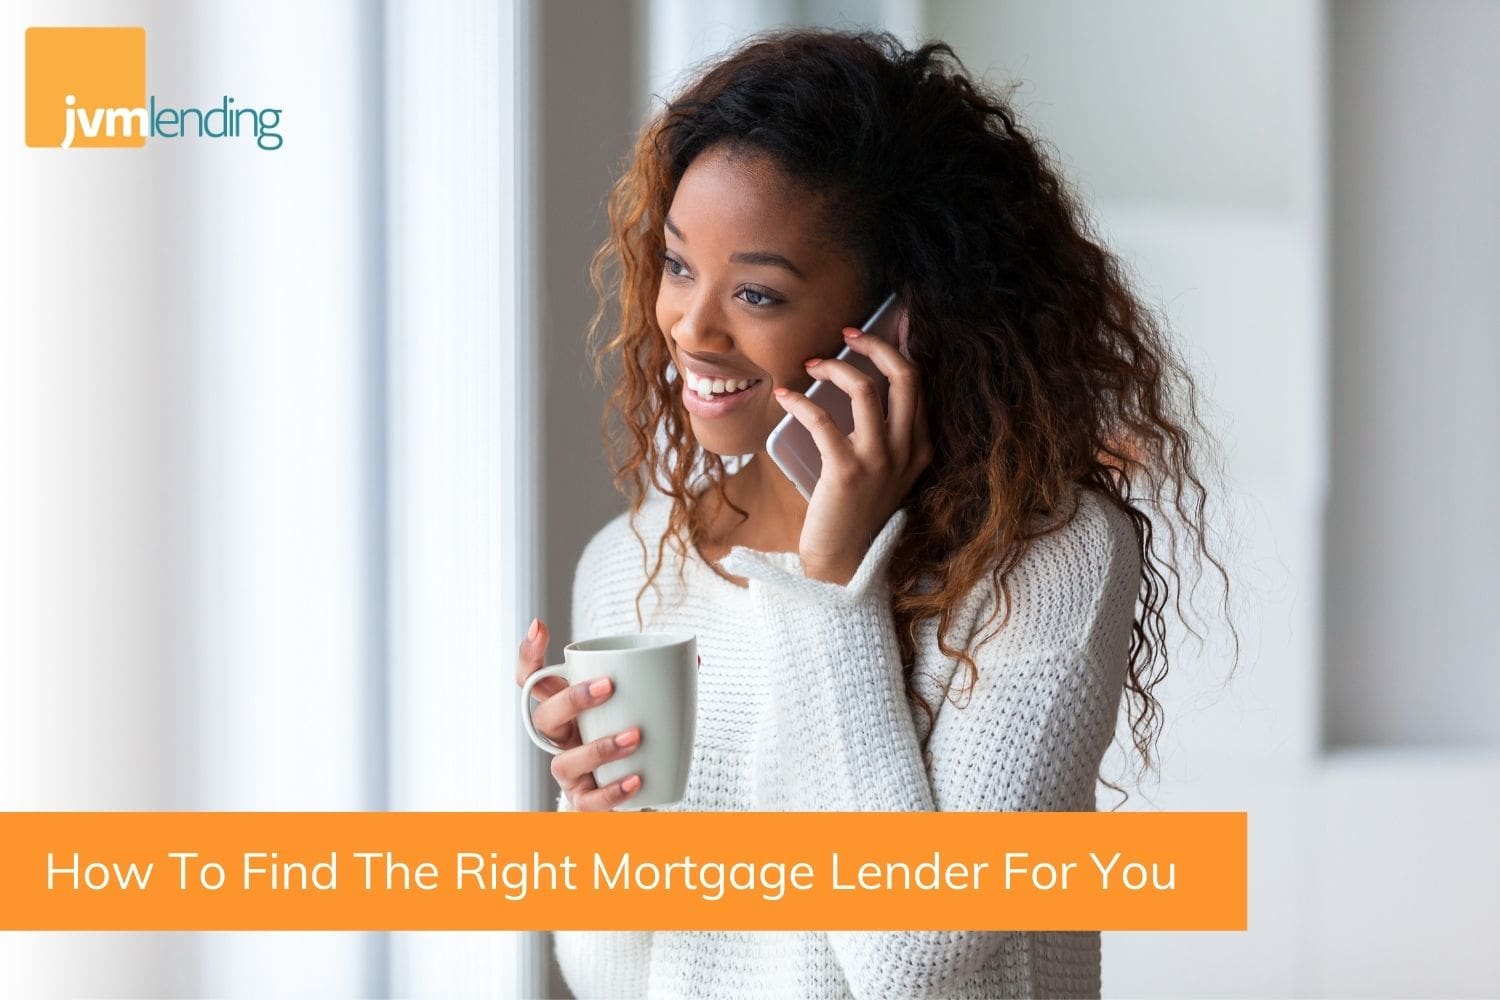 A woman on the phone calls a mortgage lender to find out if they are the right mortgage lender for her financial and homebuying goals.